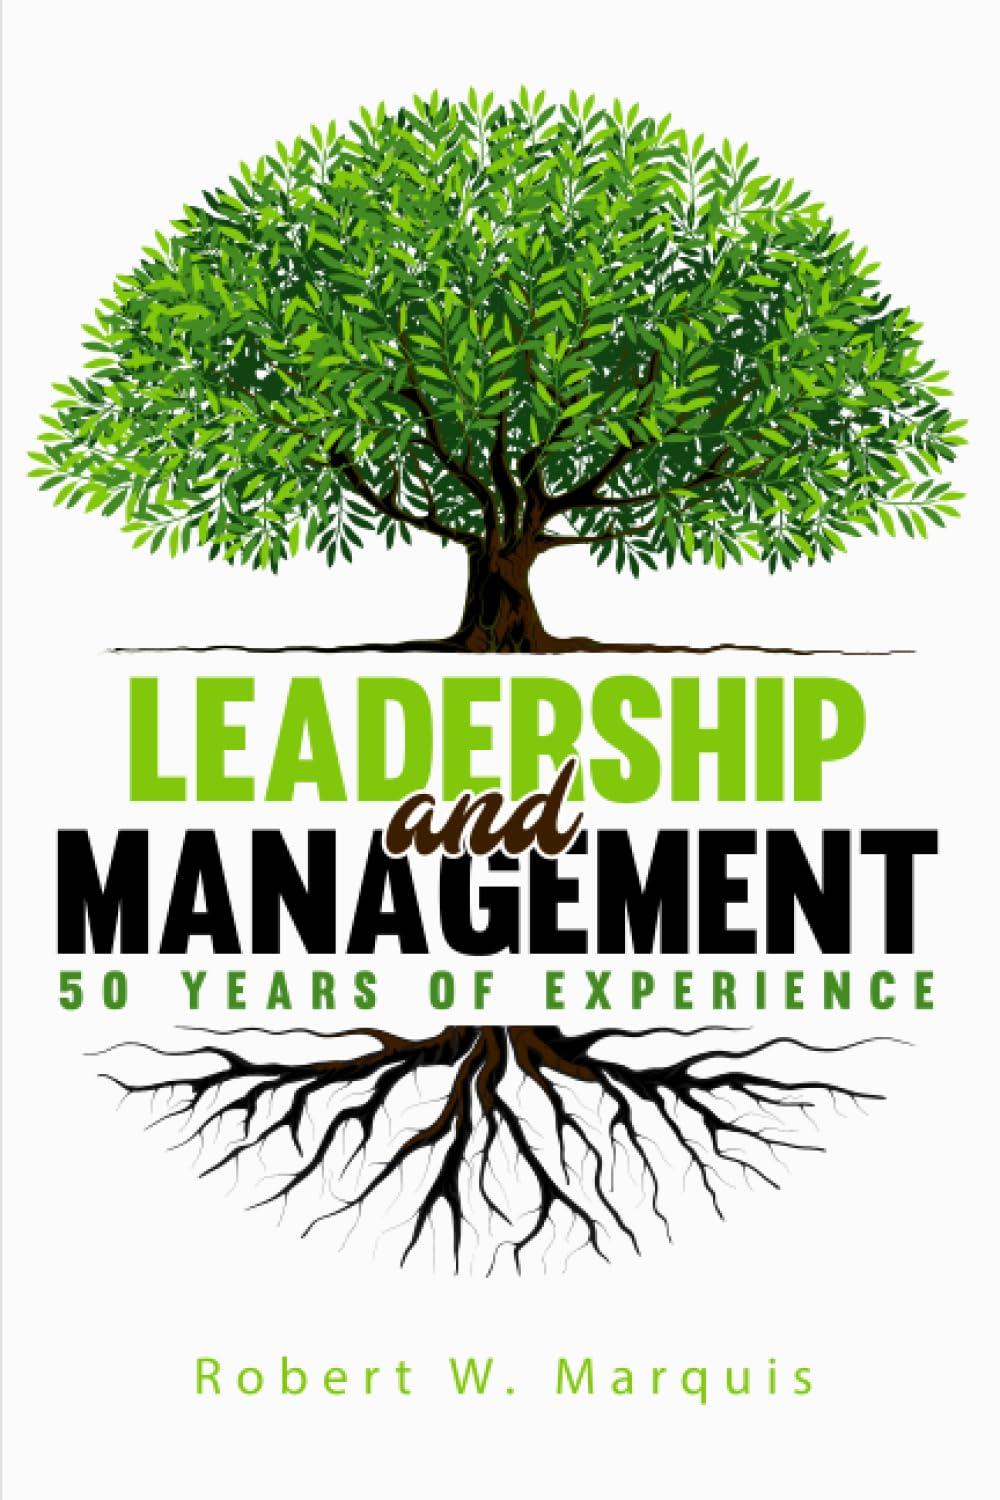 leadership and management 50 years of experience 1st edition robert w. marquis b0cc4nkp47, 979-8852661654